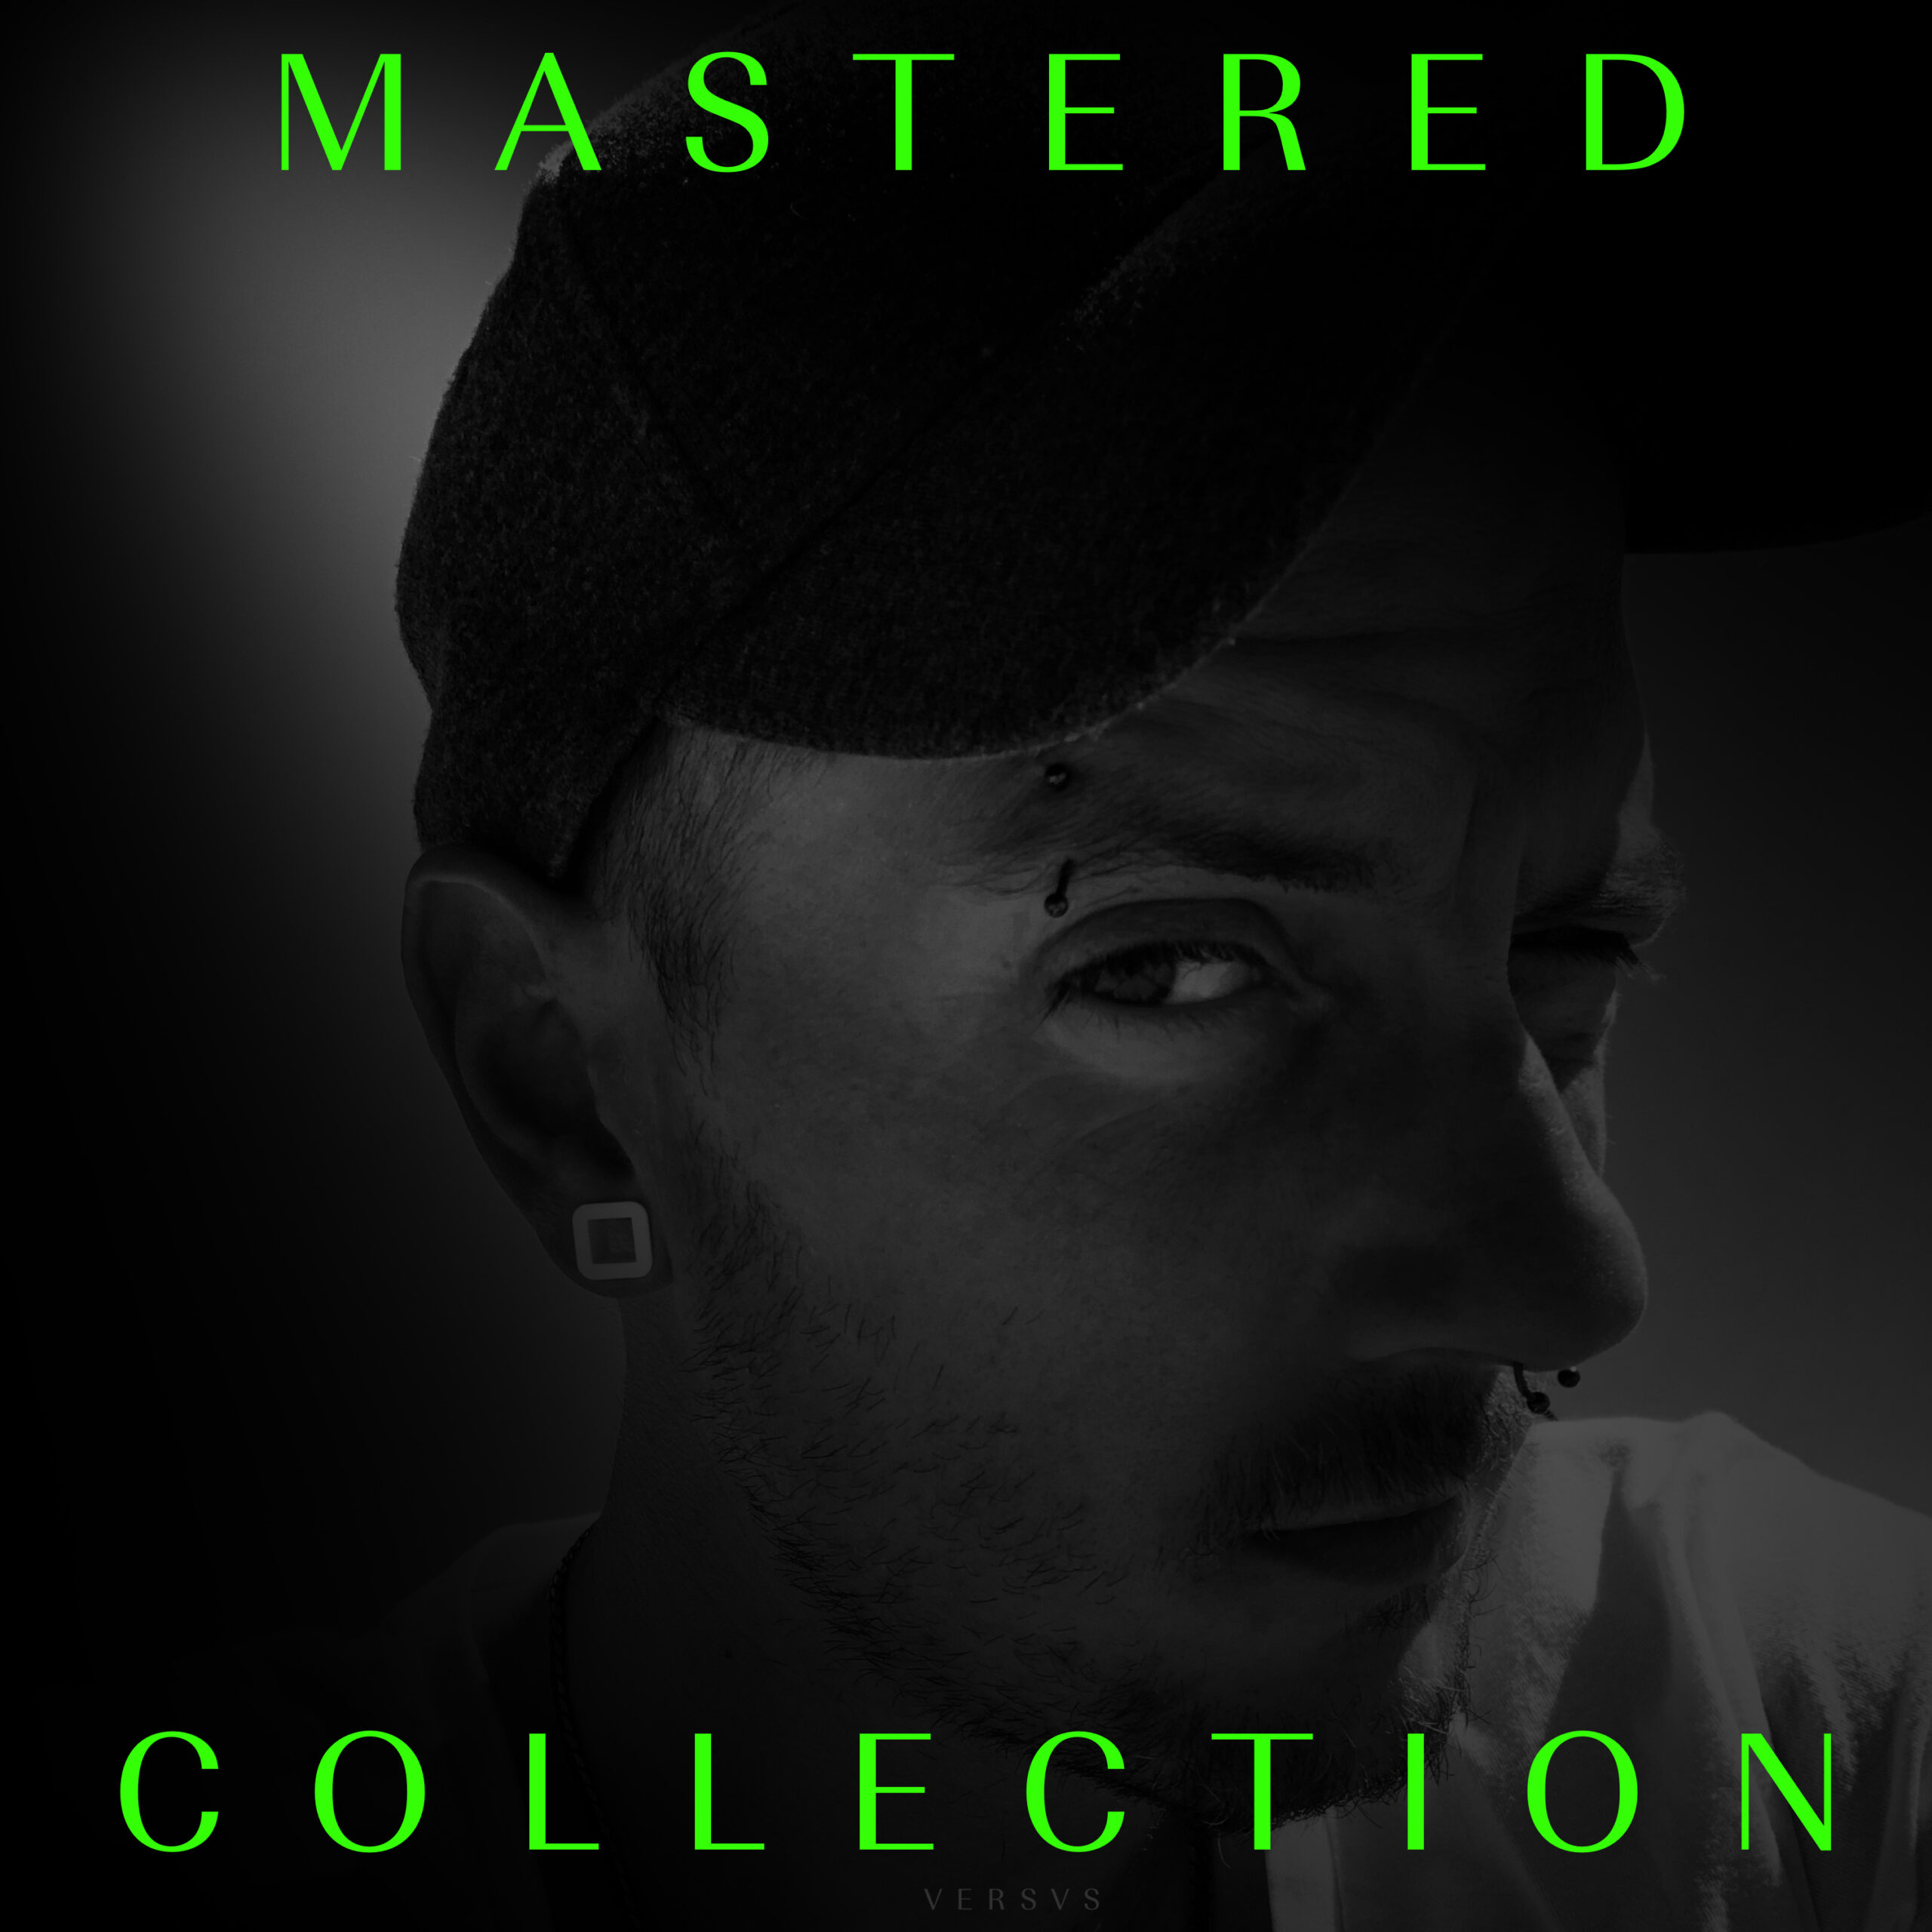 Mastered Collection in Atmos by Tommy Warzecha